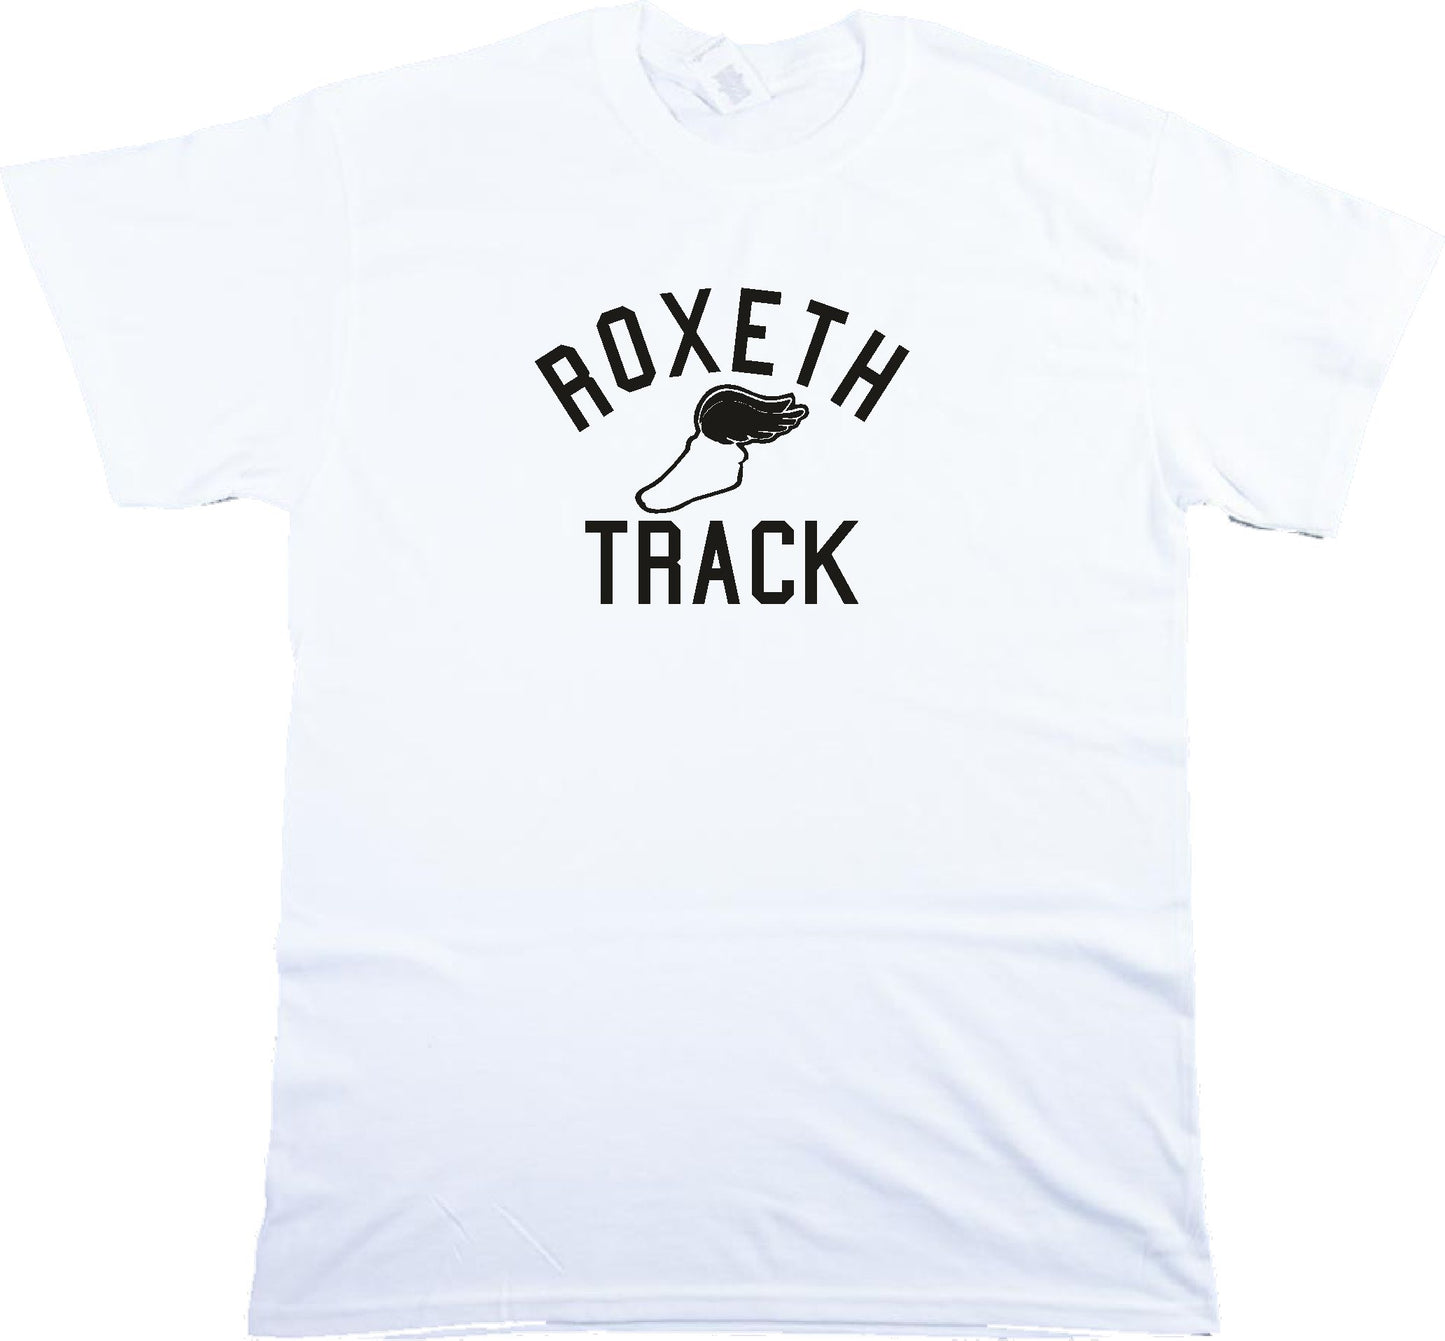 Roxeth Track T-Shirt - Retro Varsity College Style, 50s 60s, Various Colours